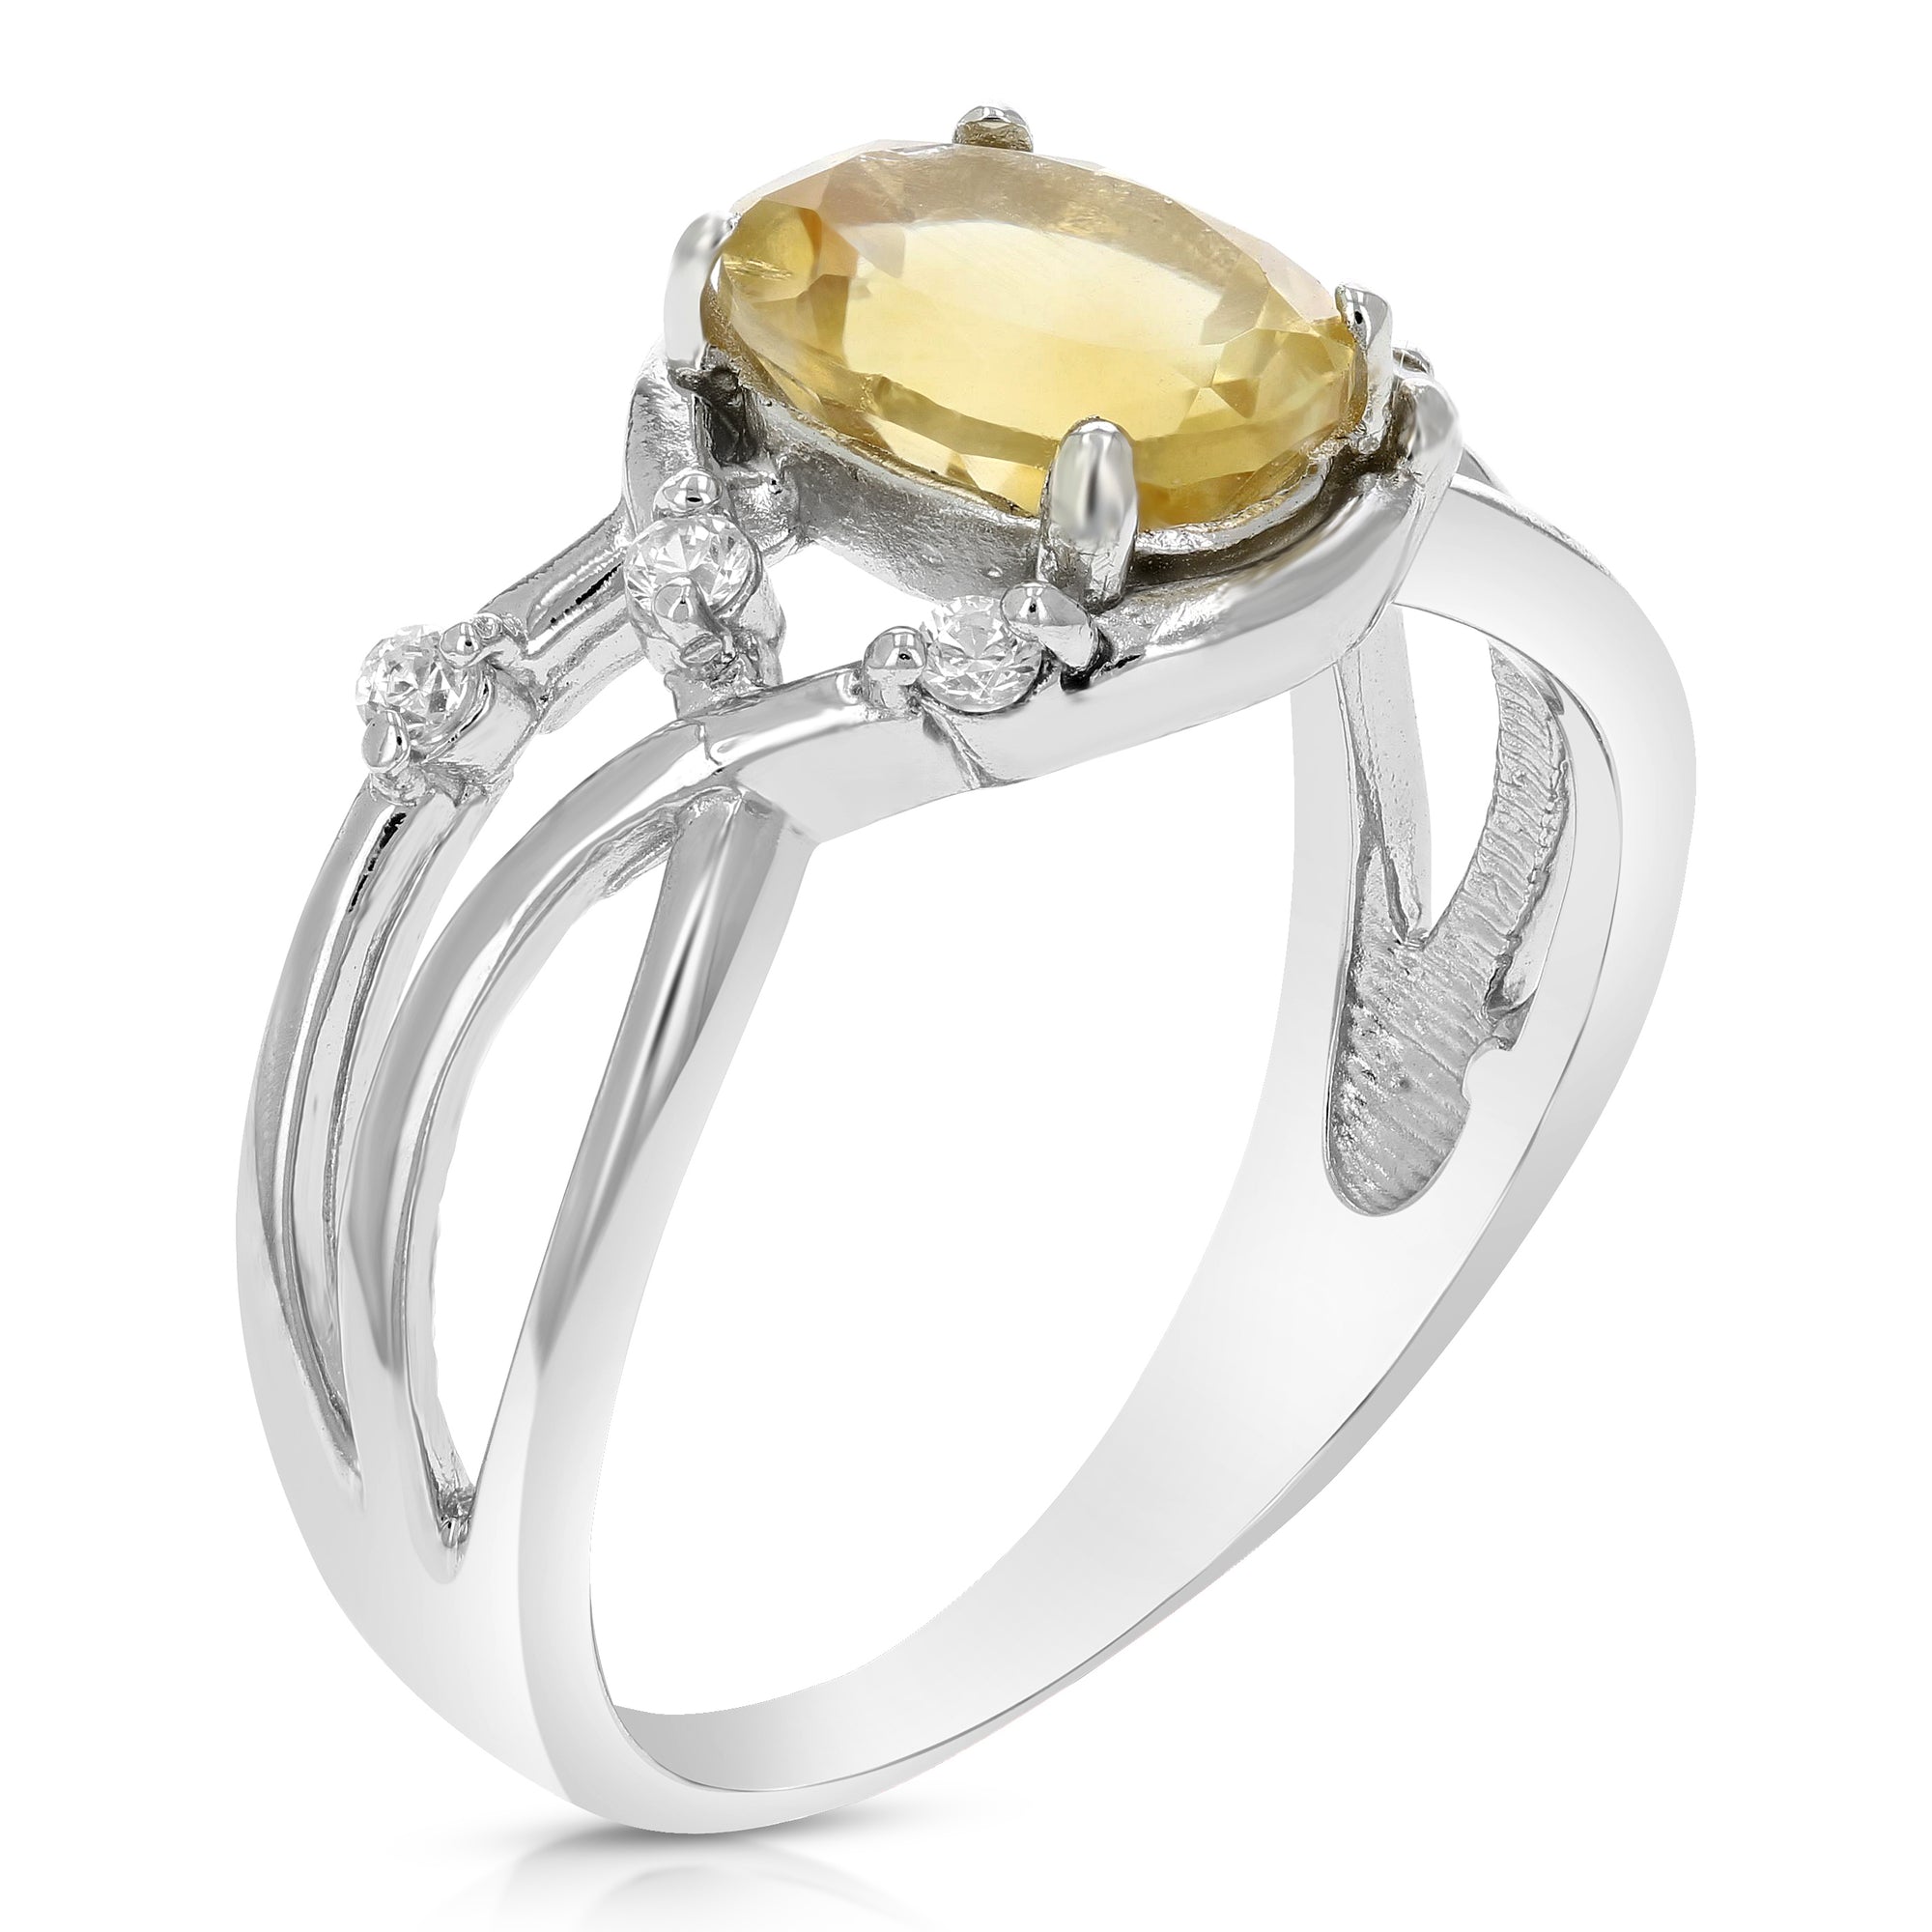 0.80 cttw Citrine Ring .925 Sterling Silver with Rhodium Oval Shape 8x6 MM